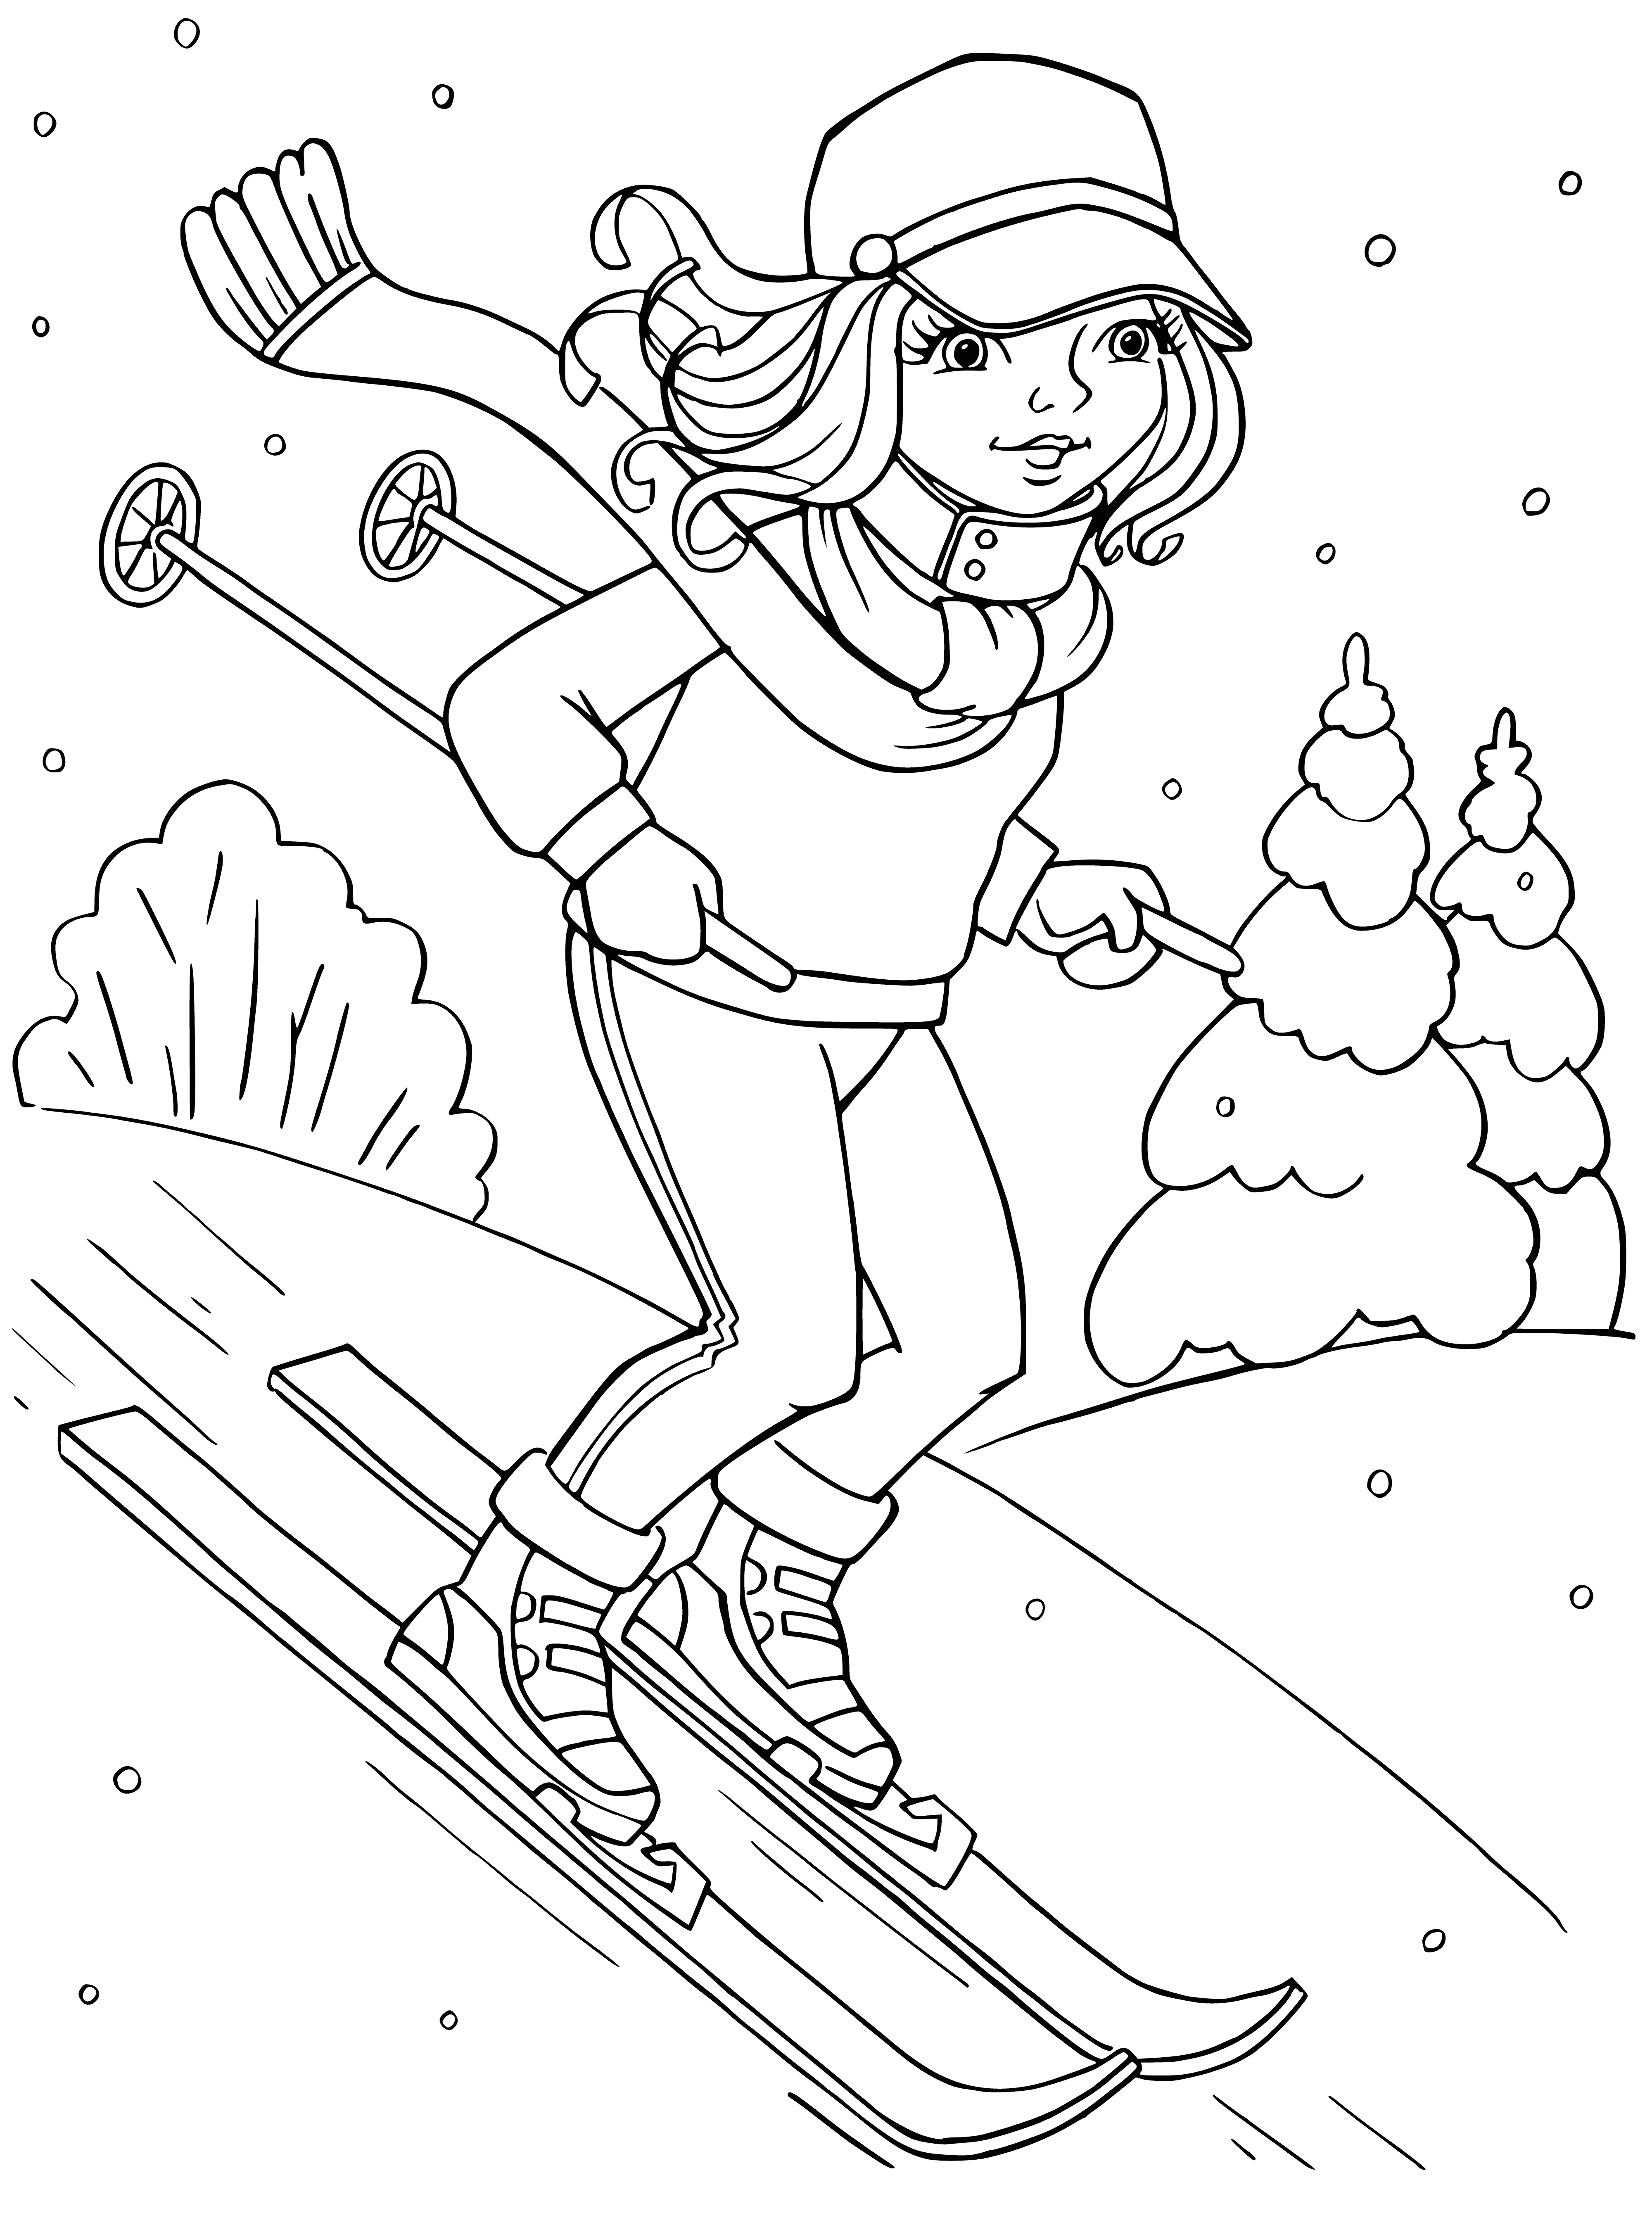 coloring page: -->Two skis, ski poles propped against wall, adult-size, covered in snow- perfect for a winter coloring page!